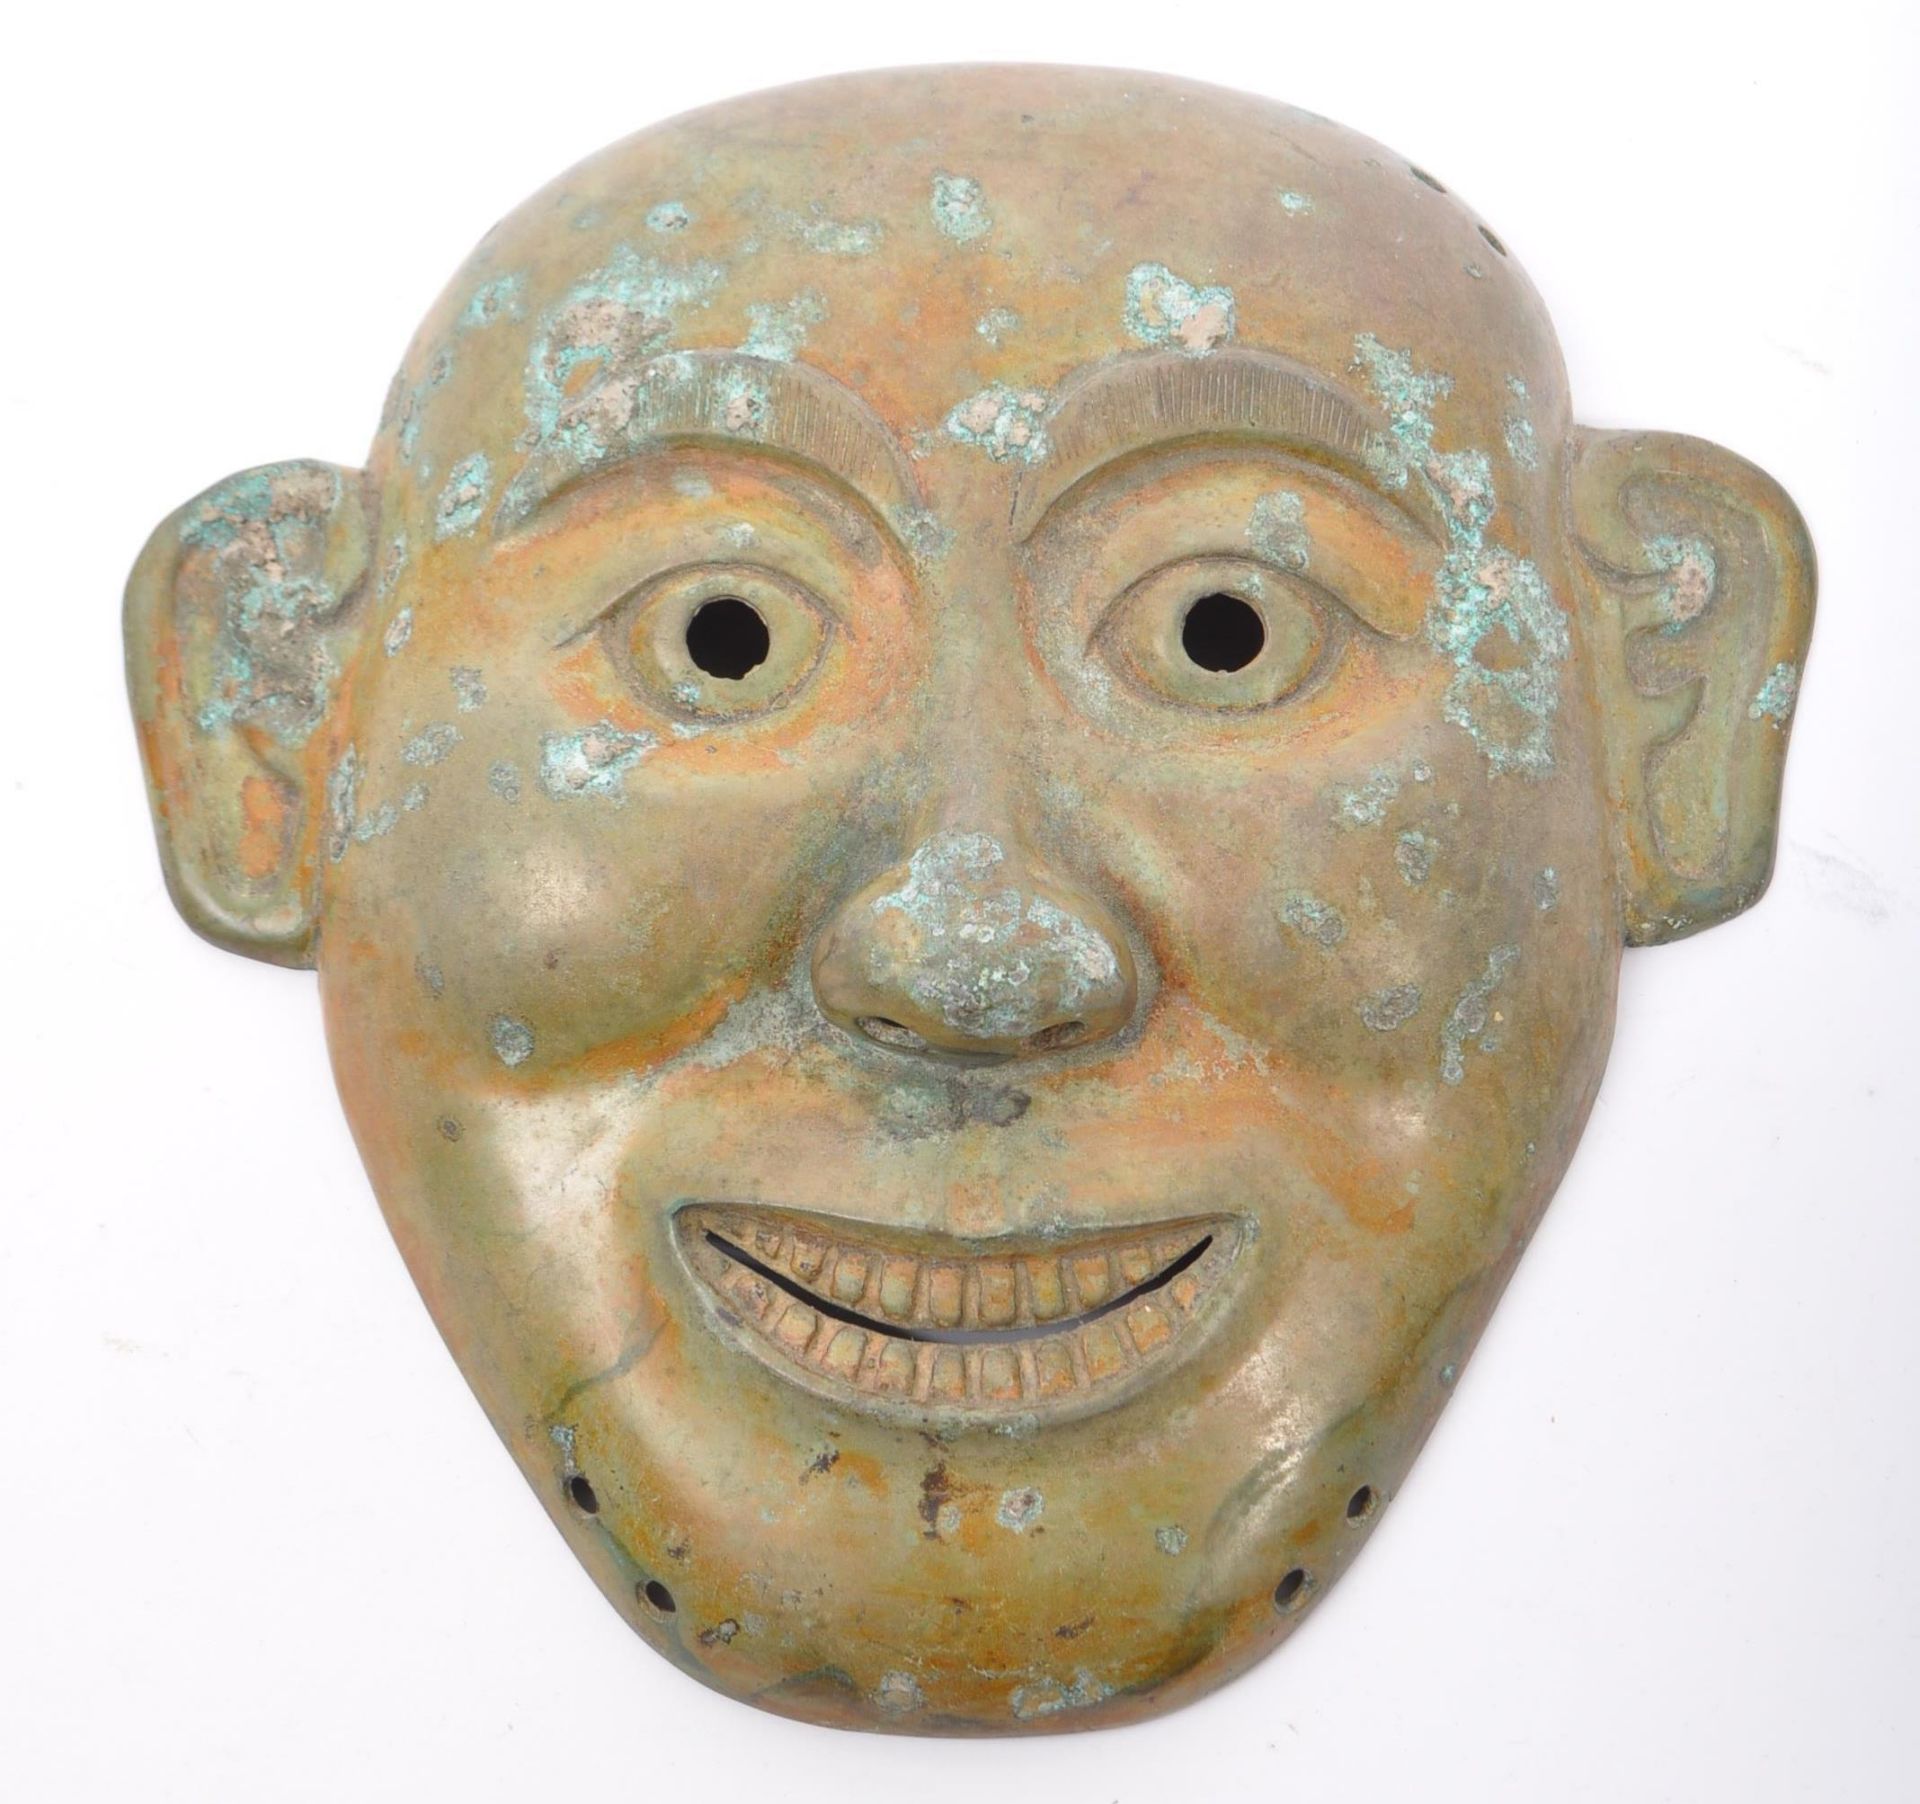 VINTAGE 20TH CENTURY HAN DYNASTY REPRO BRONZEWARE MASK - Image 2 of 3